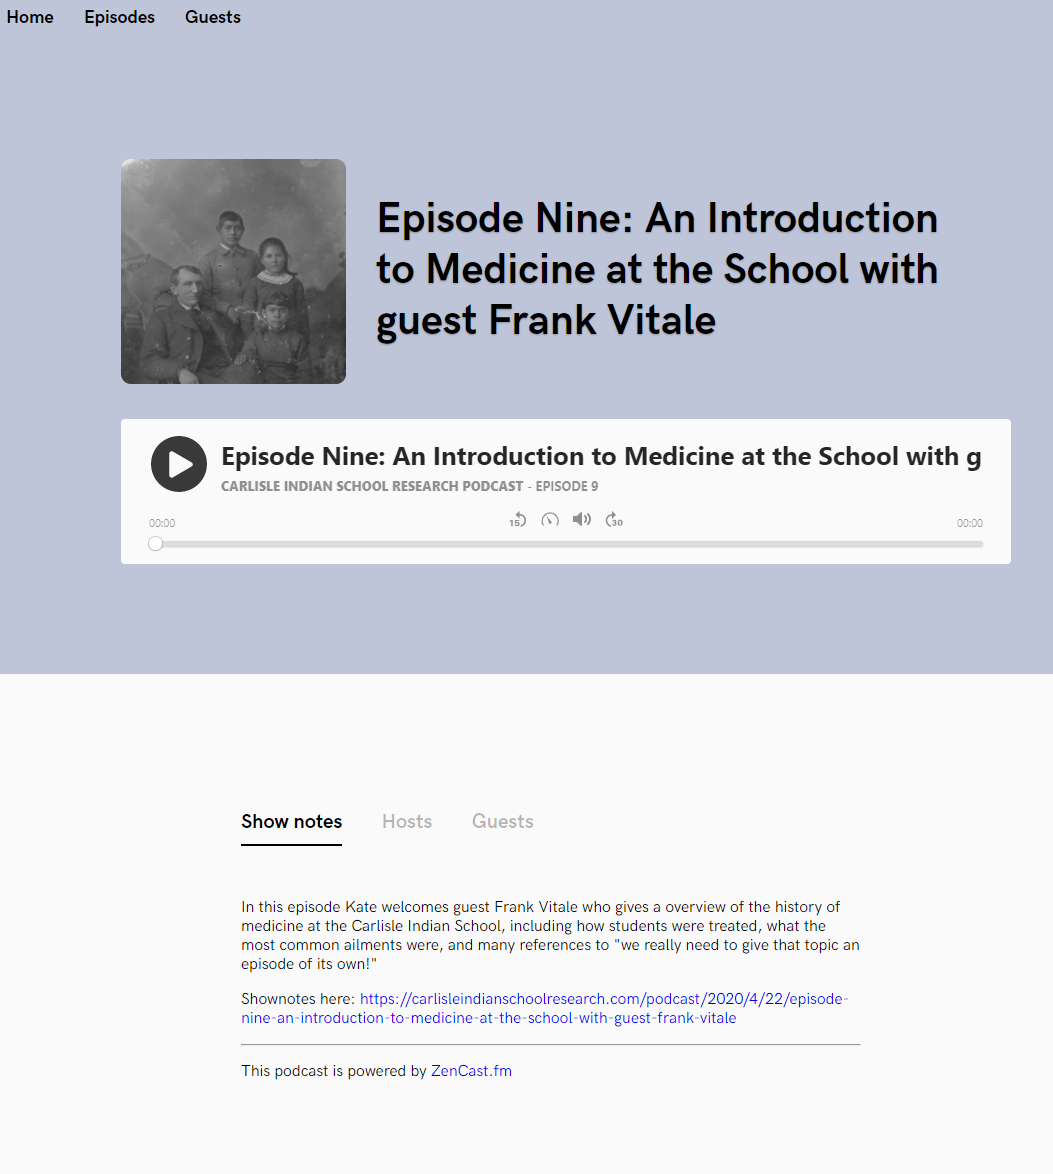 Snippet from the webpage for "Episode Nine: An Introduction to Medicine at the School with guest Frank Vitale" on the Carlisle Indian School Research podcast website